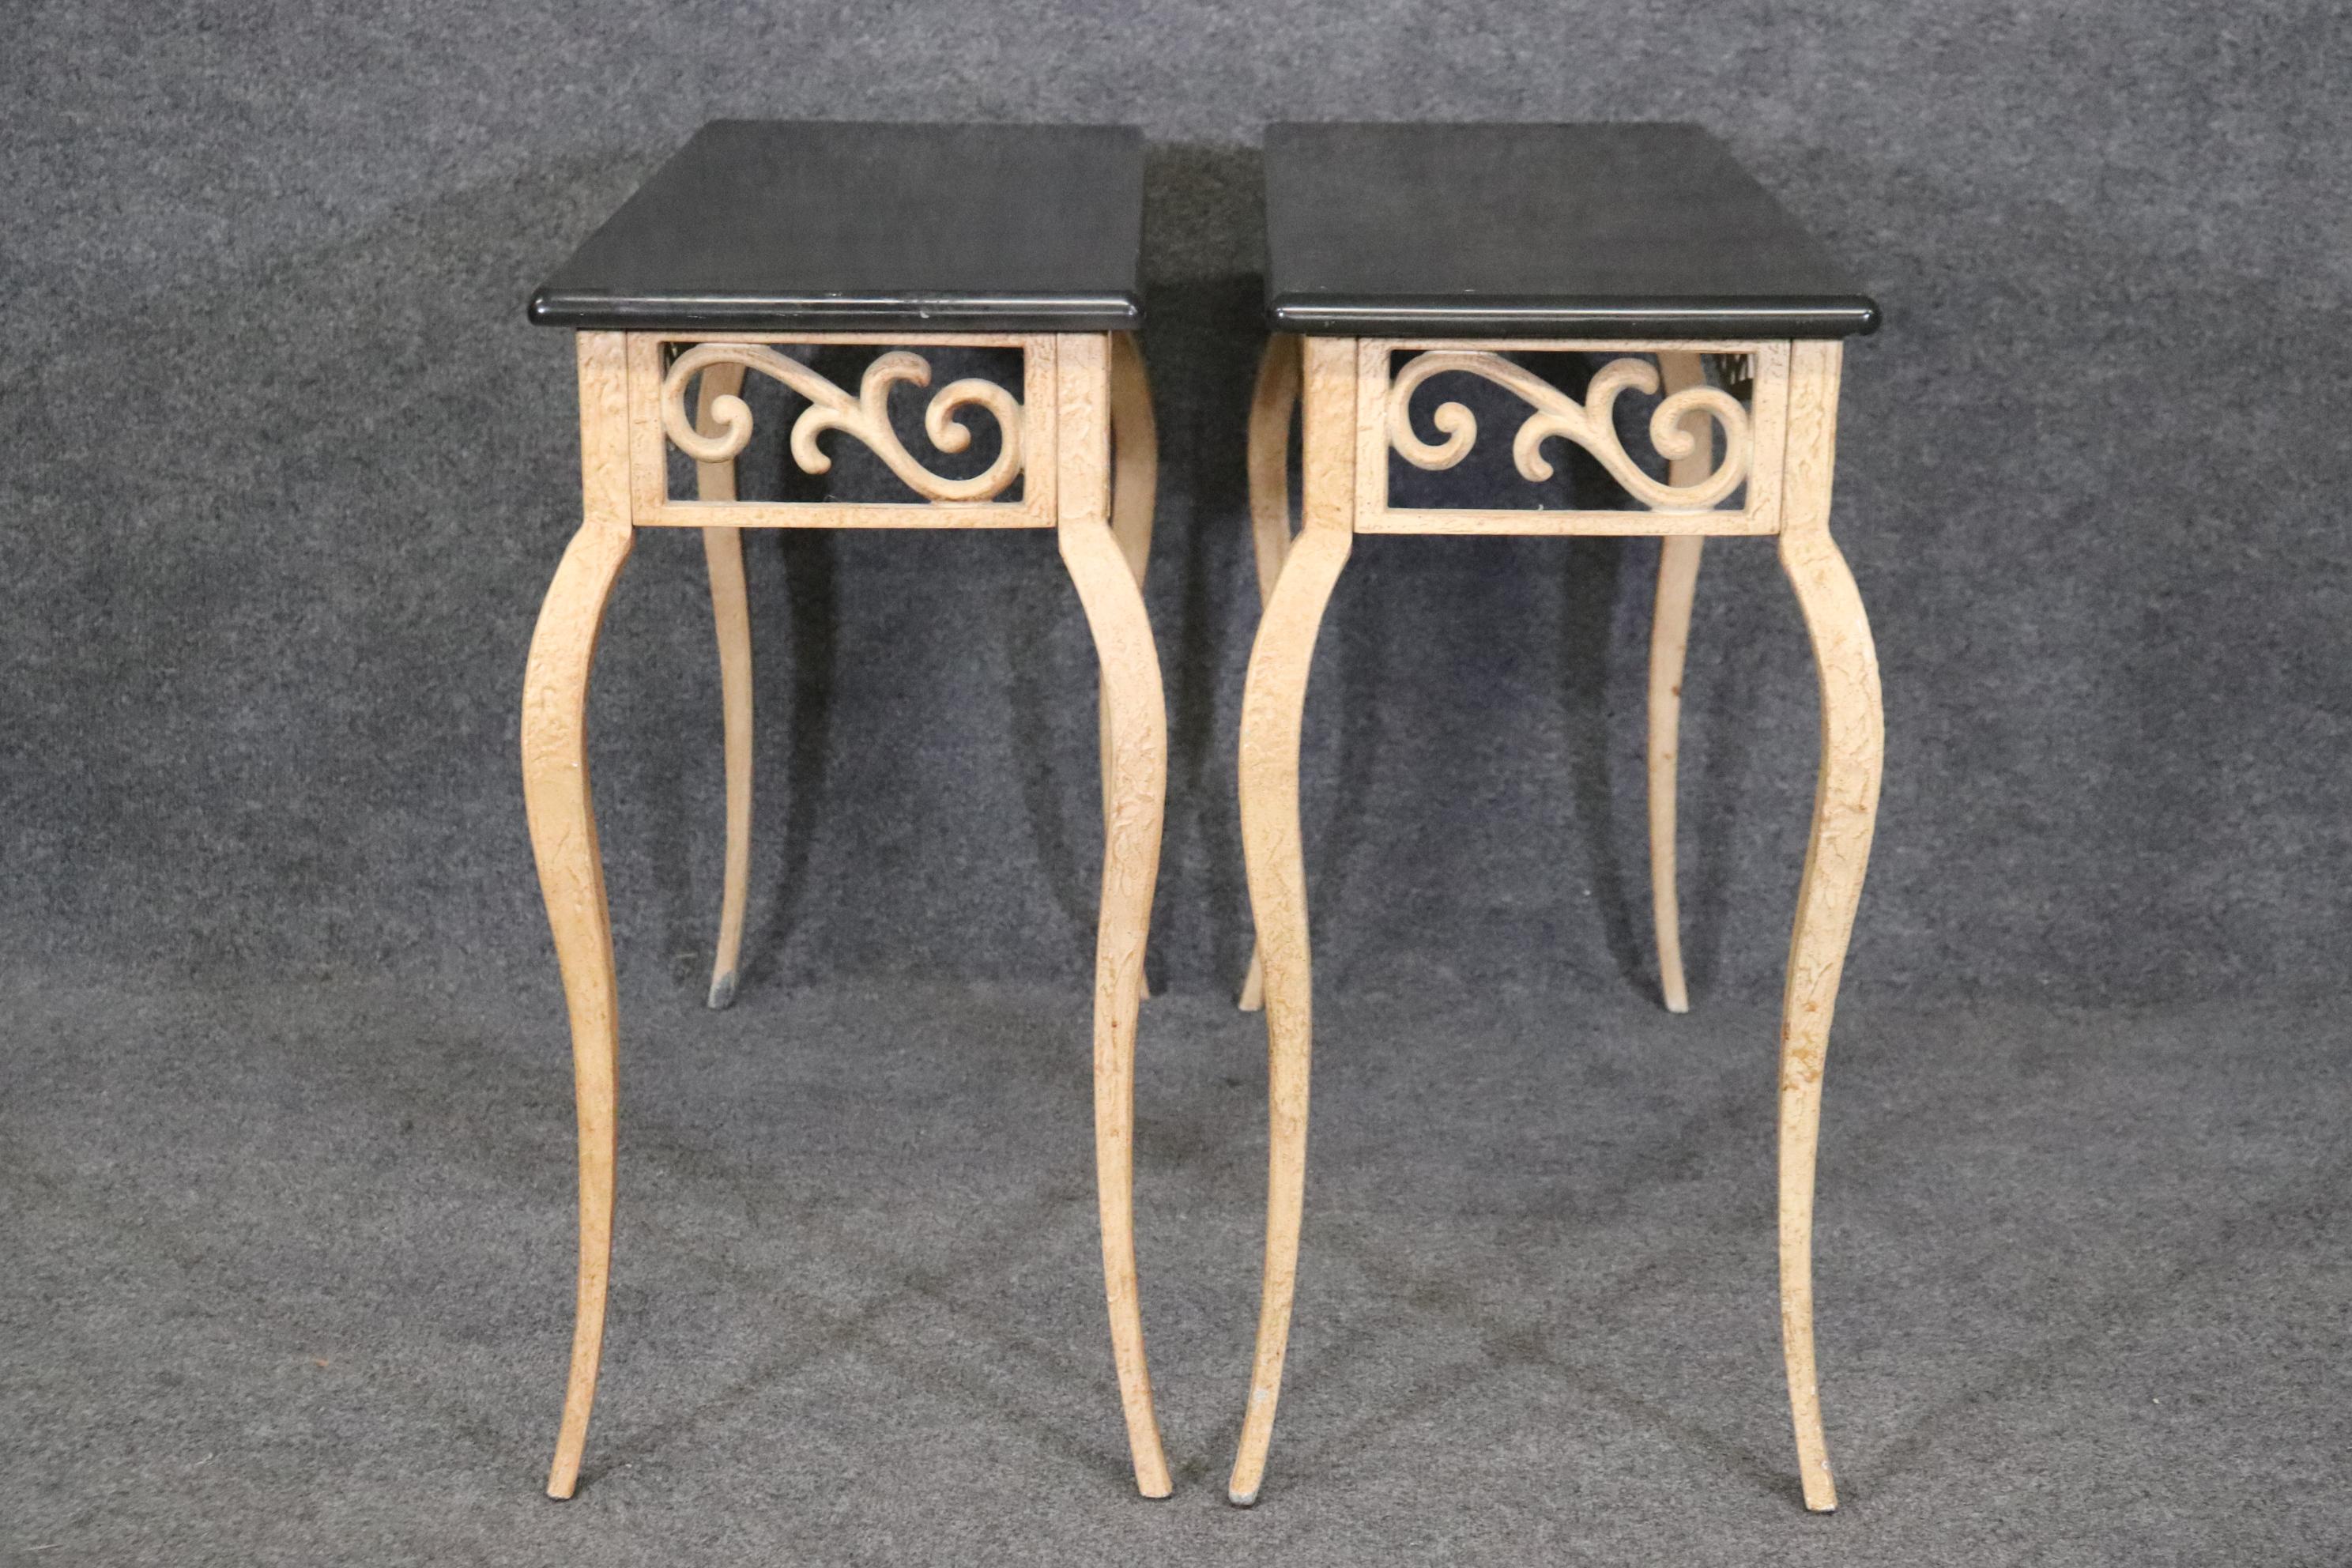 Regency Pair of Italian Style Metal Consoles With Faux Marble Tops